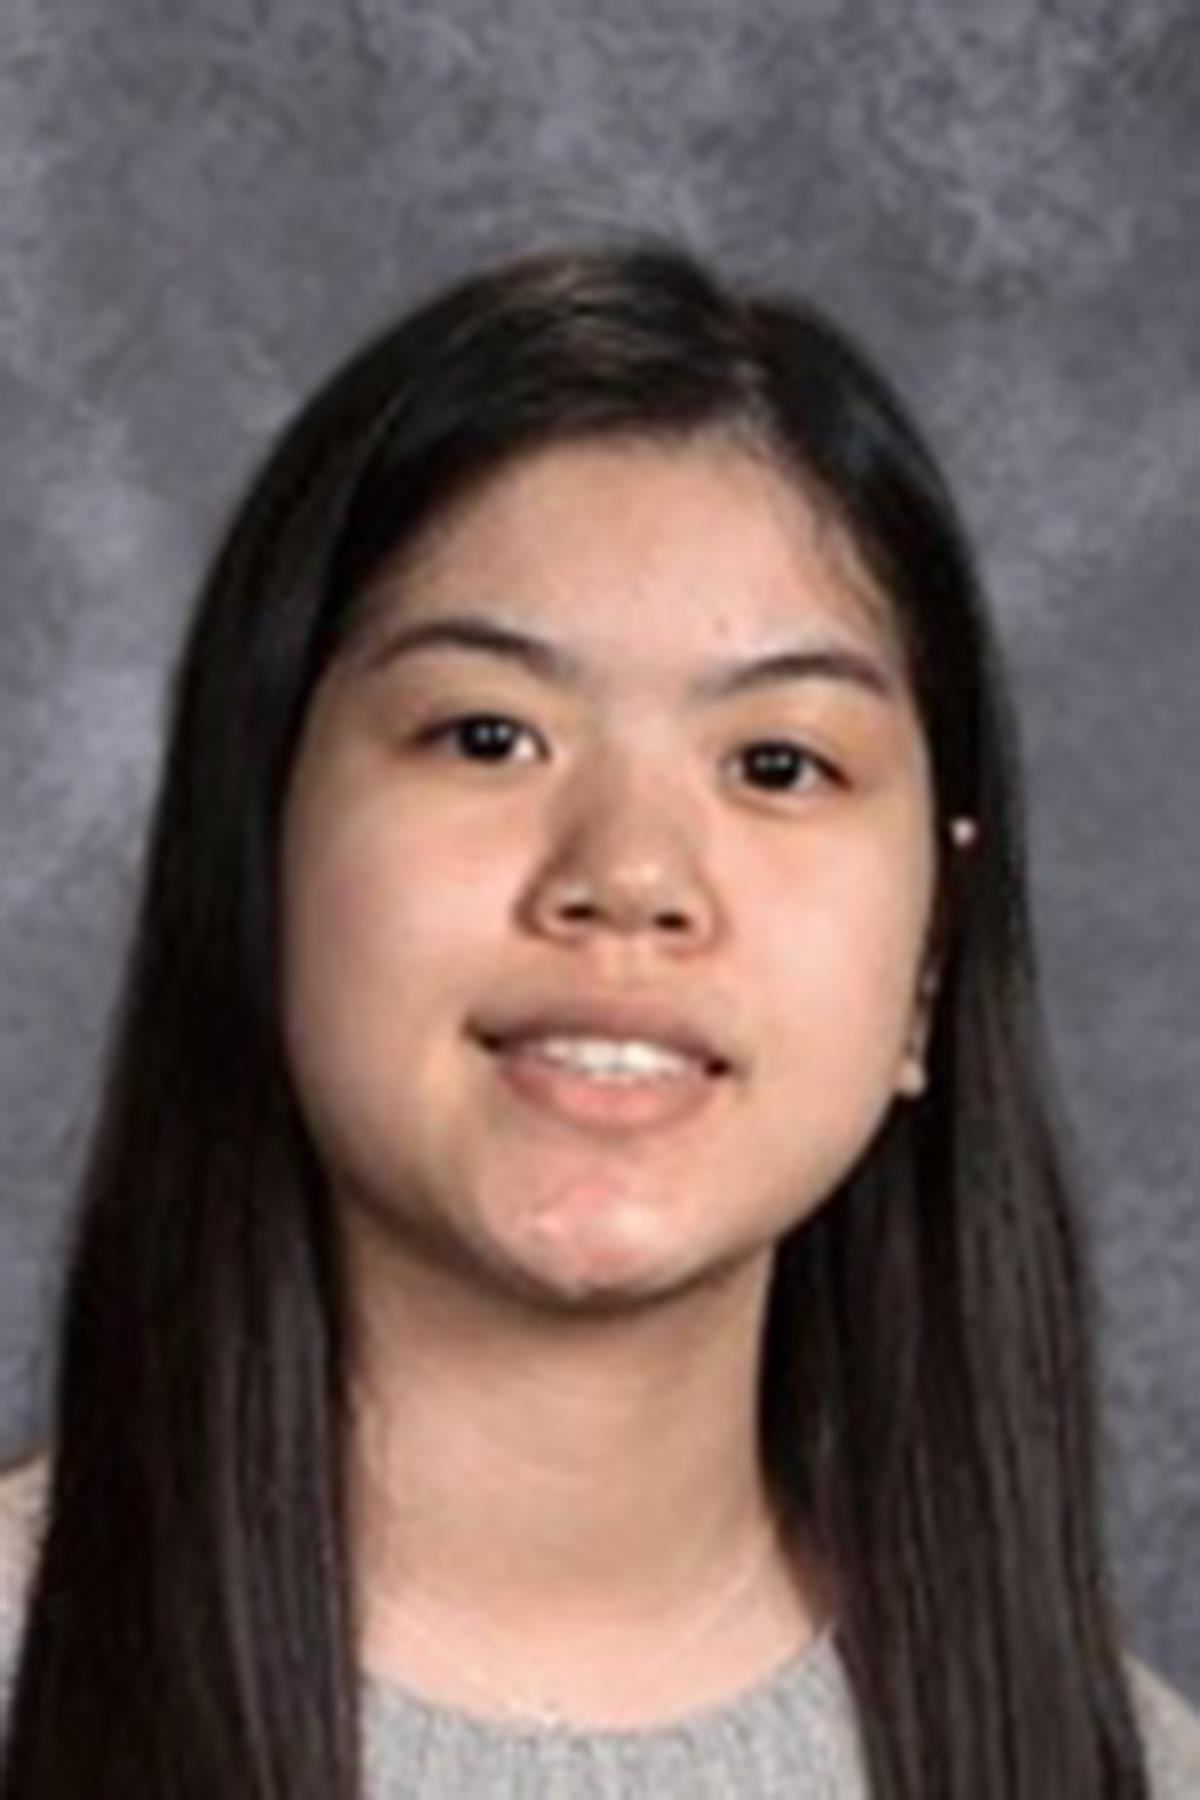 Cypress Ridge senior Sara Tran is a well-rounded student who’s honors and accolades include distinguished honor roll.